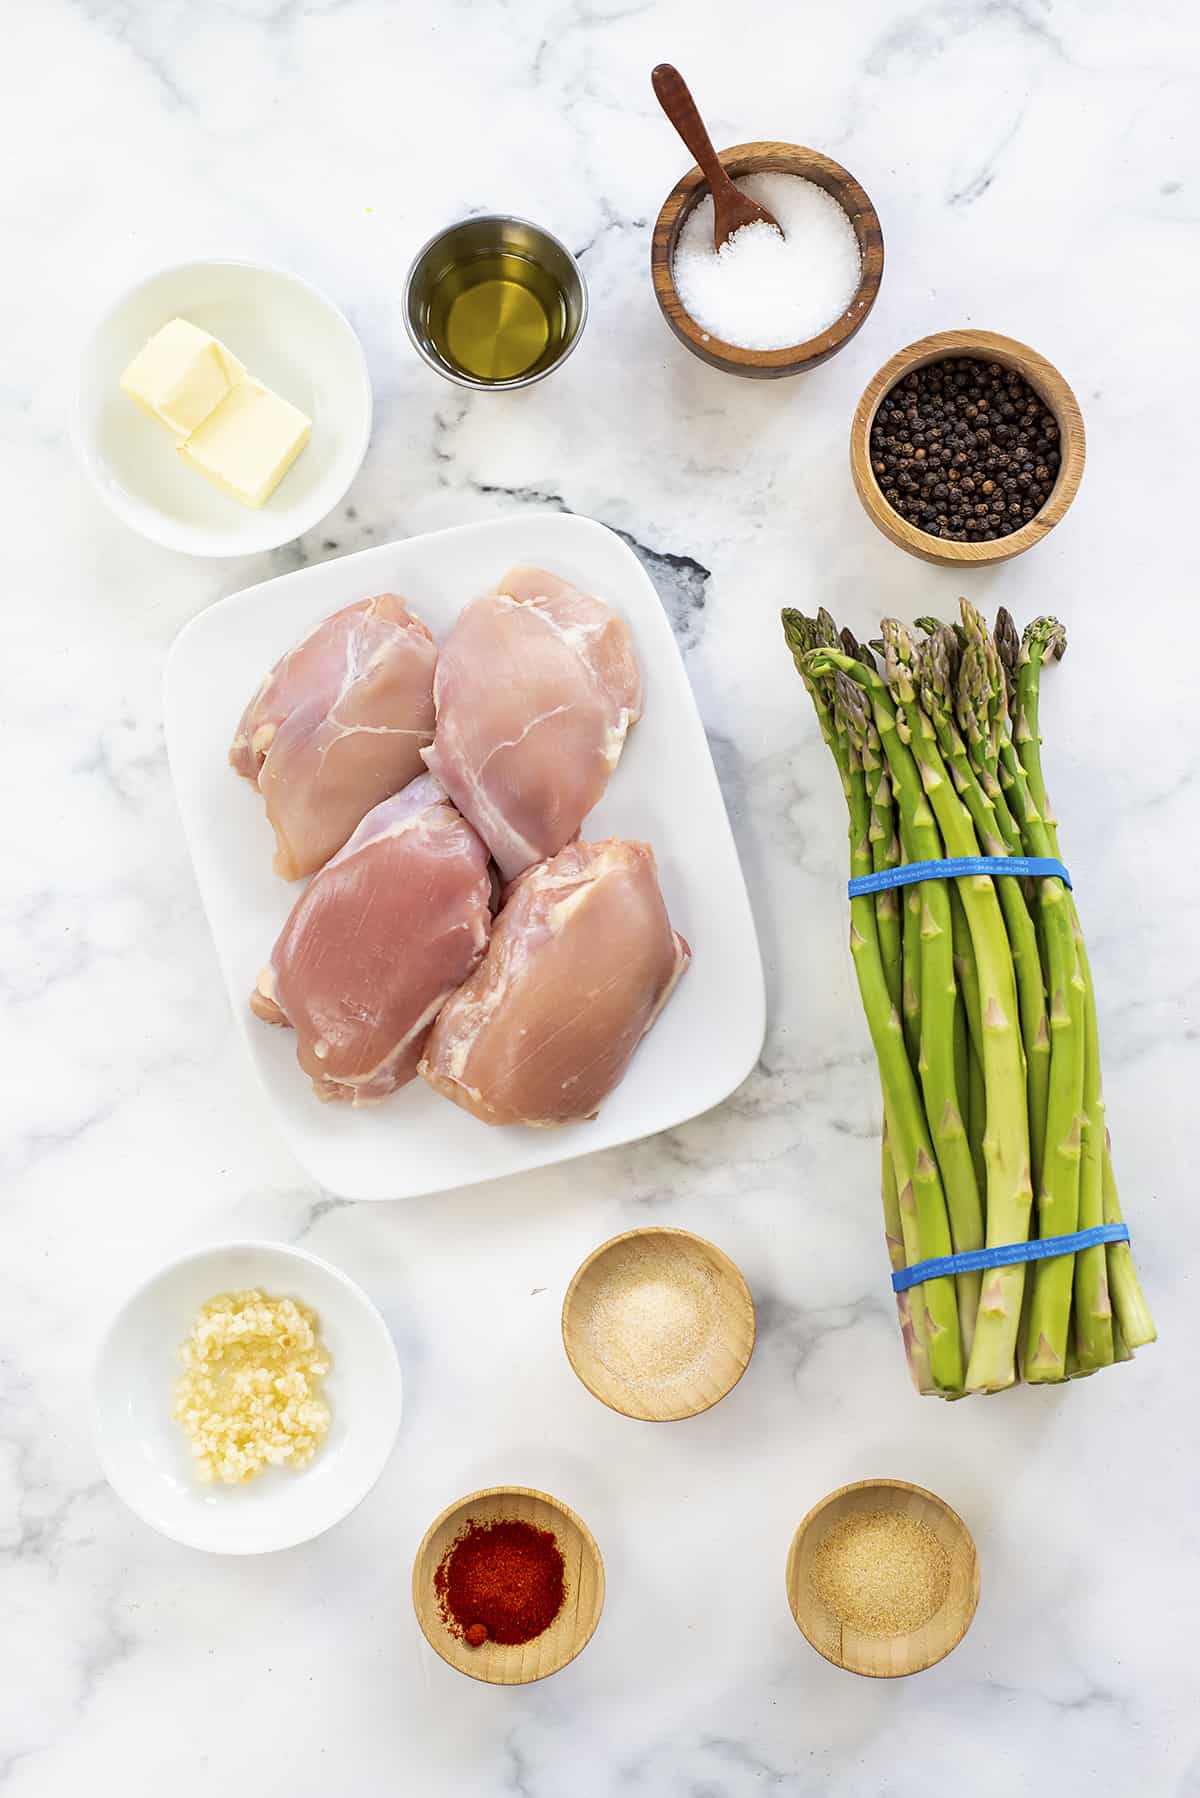 Ingredients for chicken and asparagus skillet recipe.